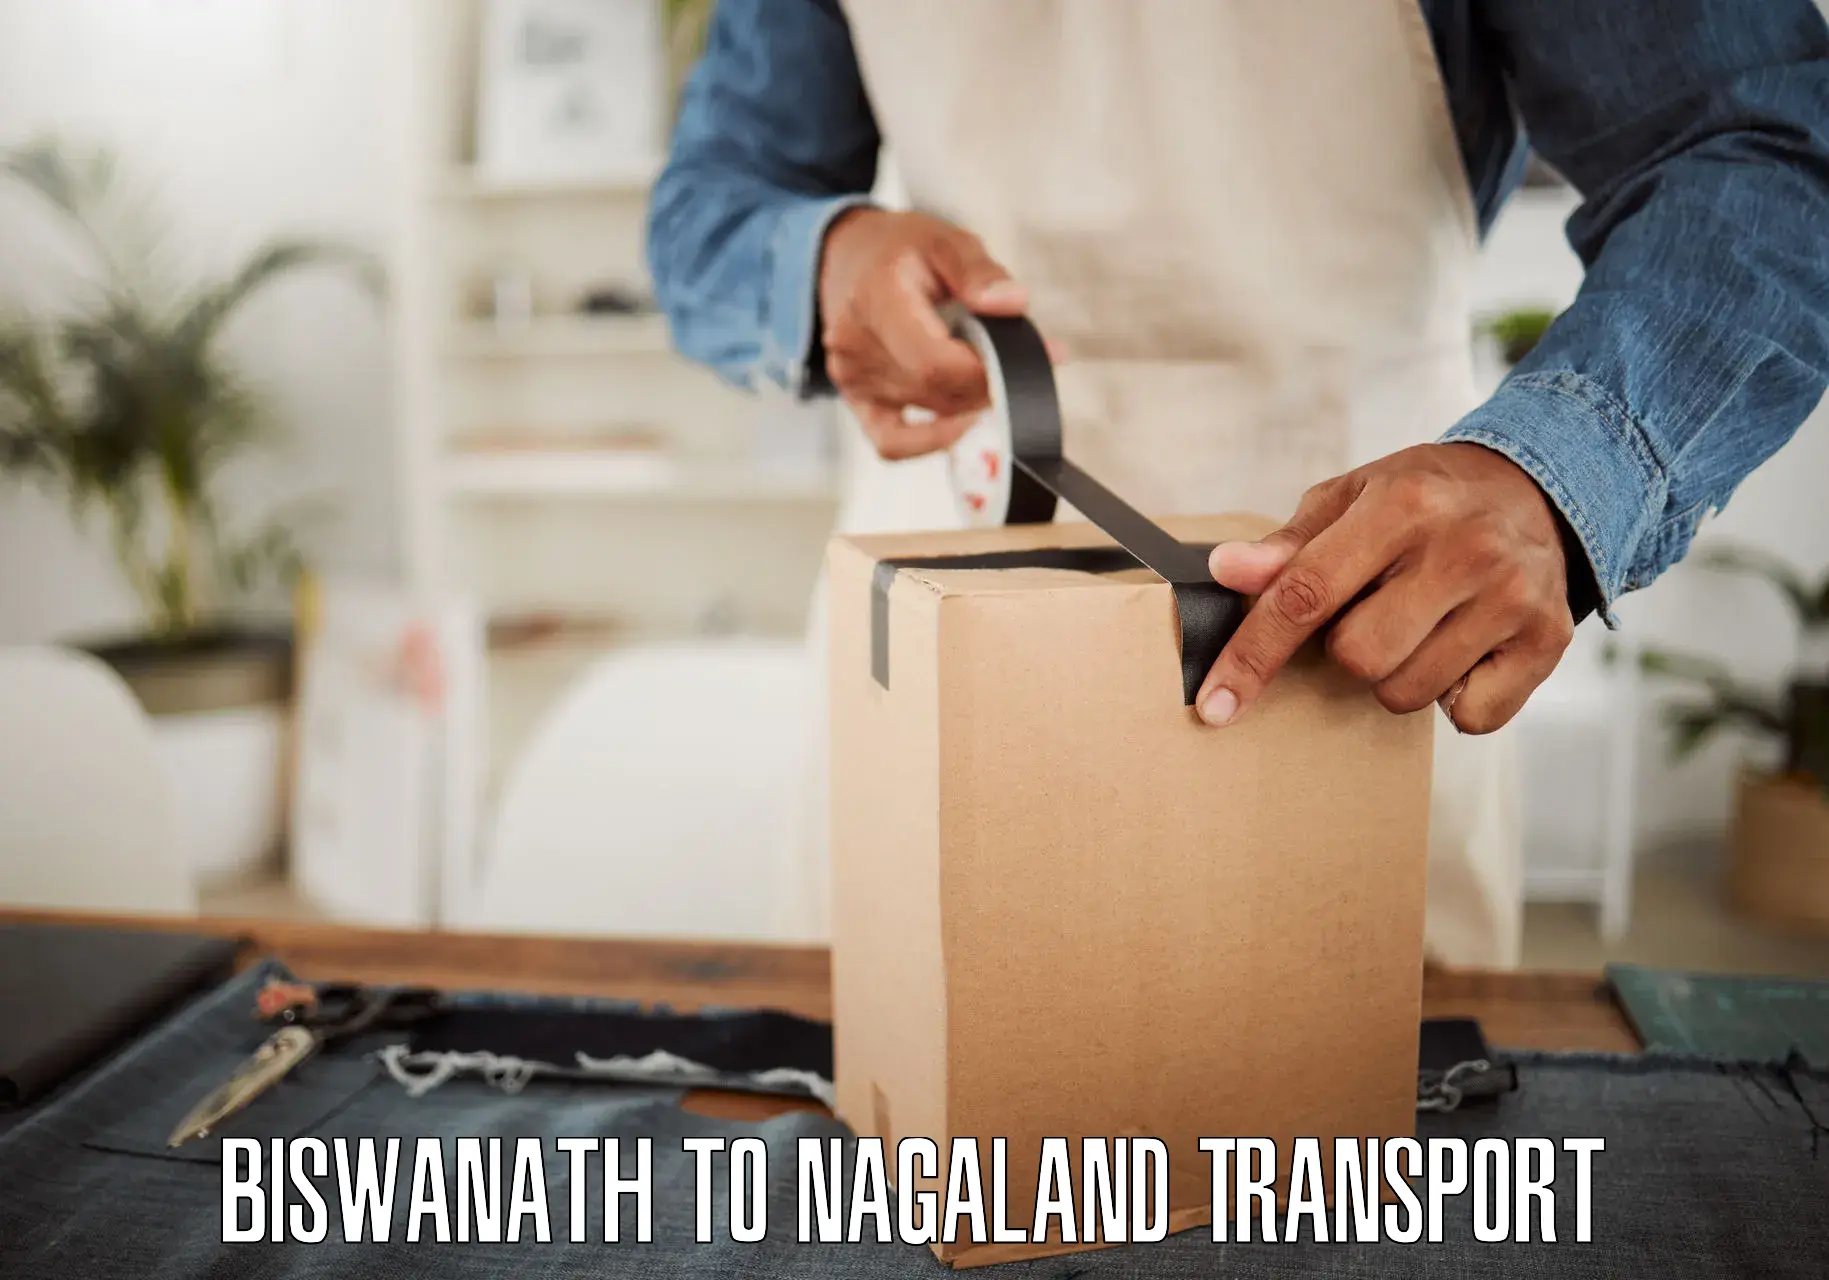 Truck transport companies in India Biswanath to Nagaland